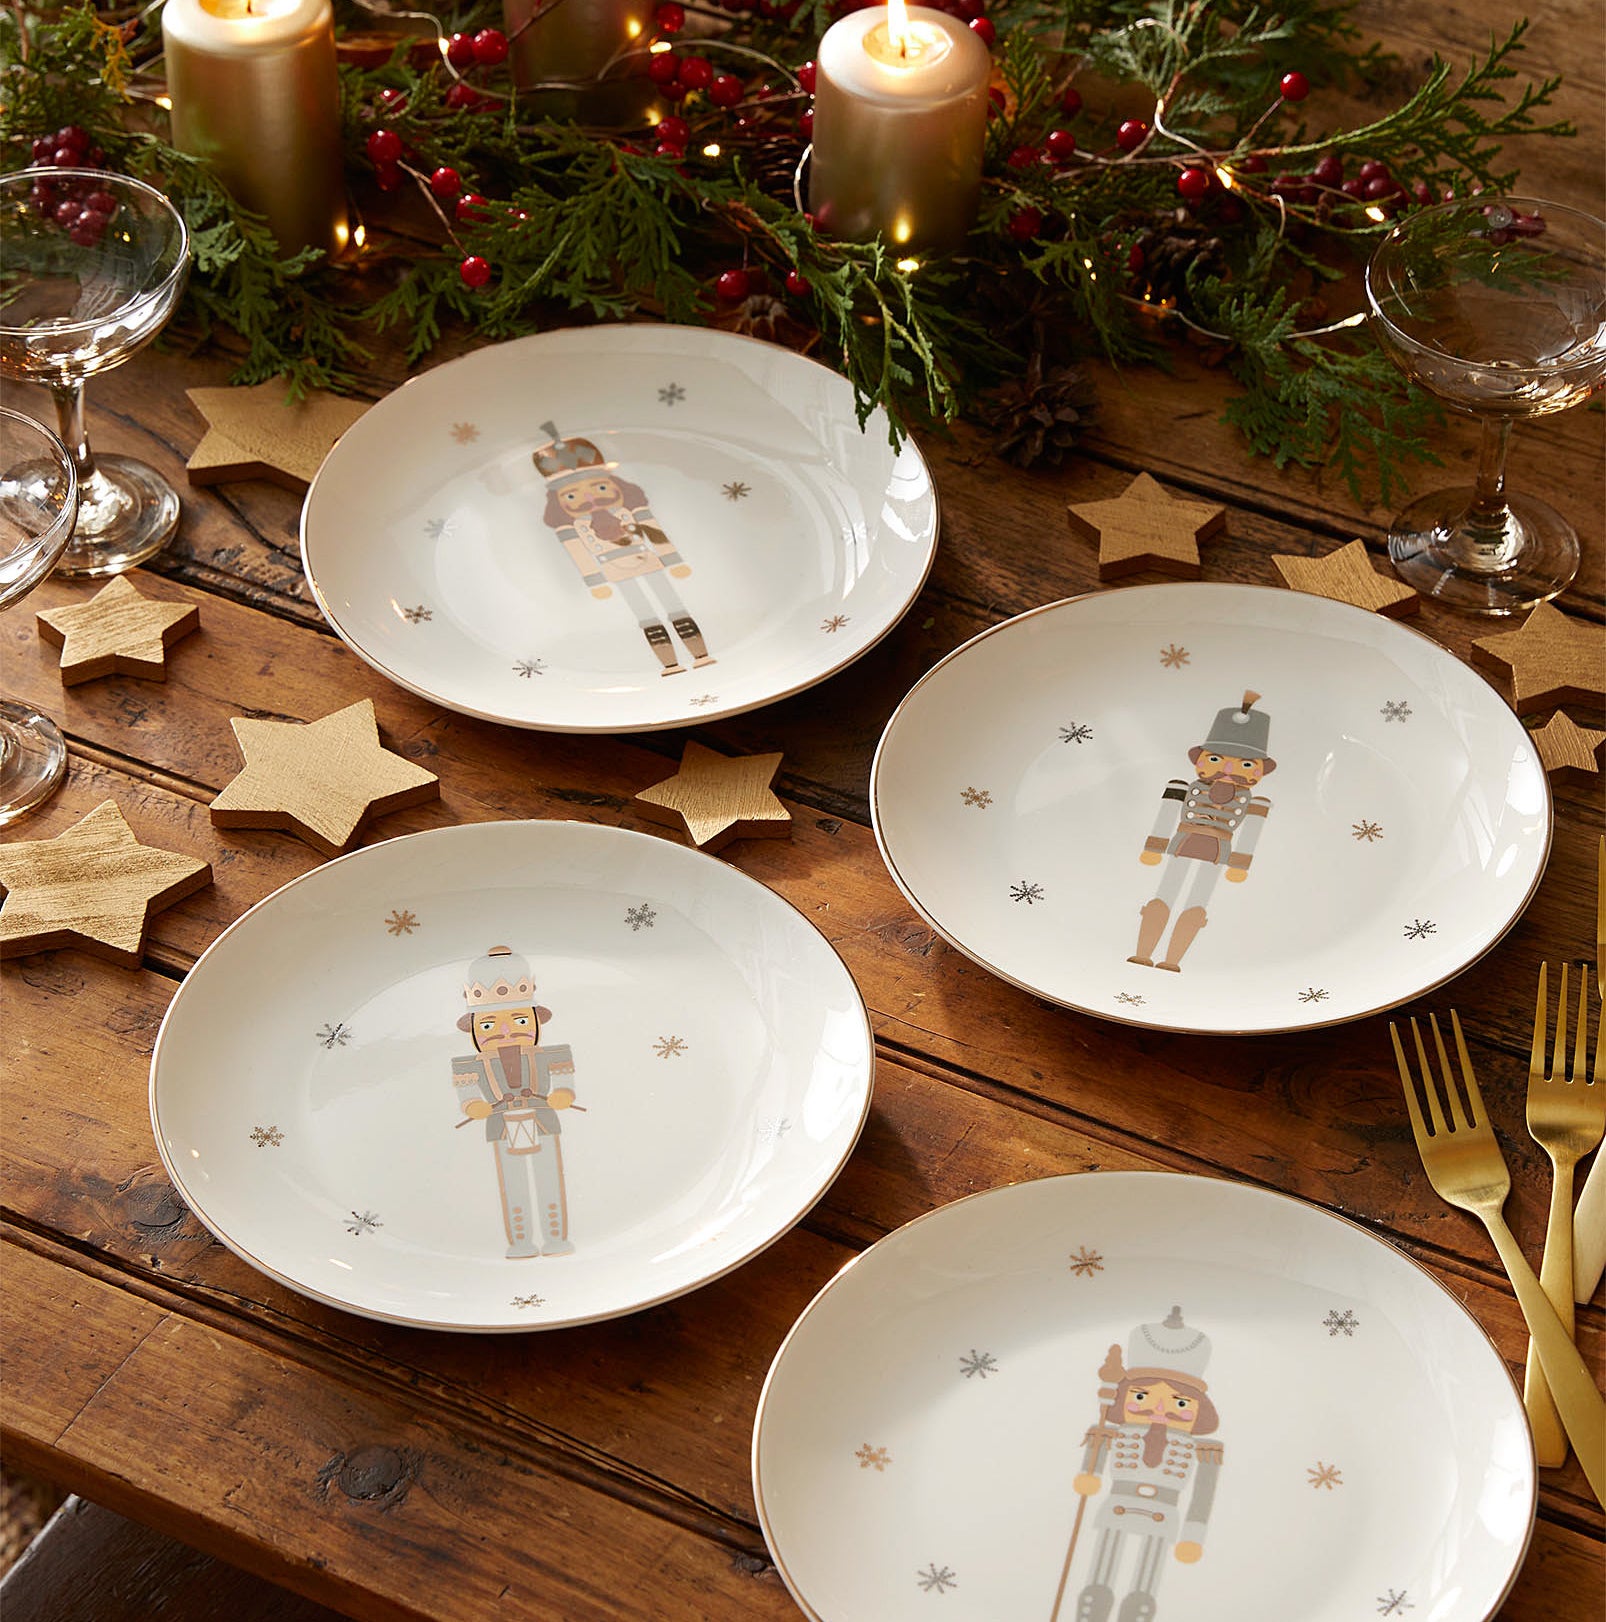 the plates on a decorated table